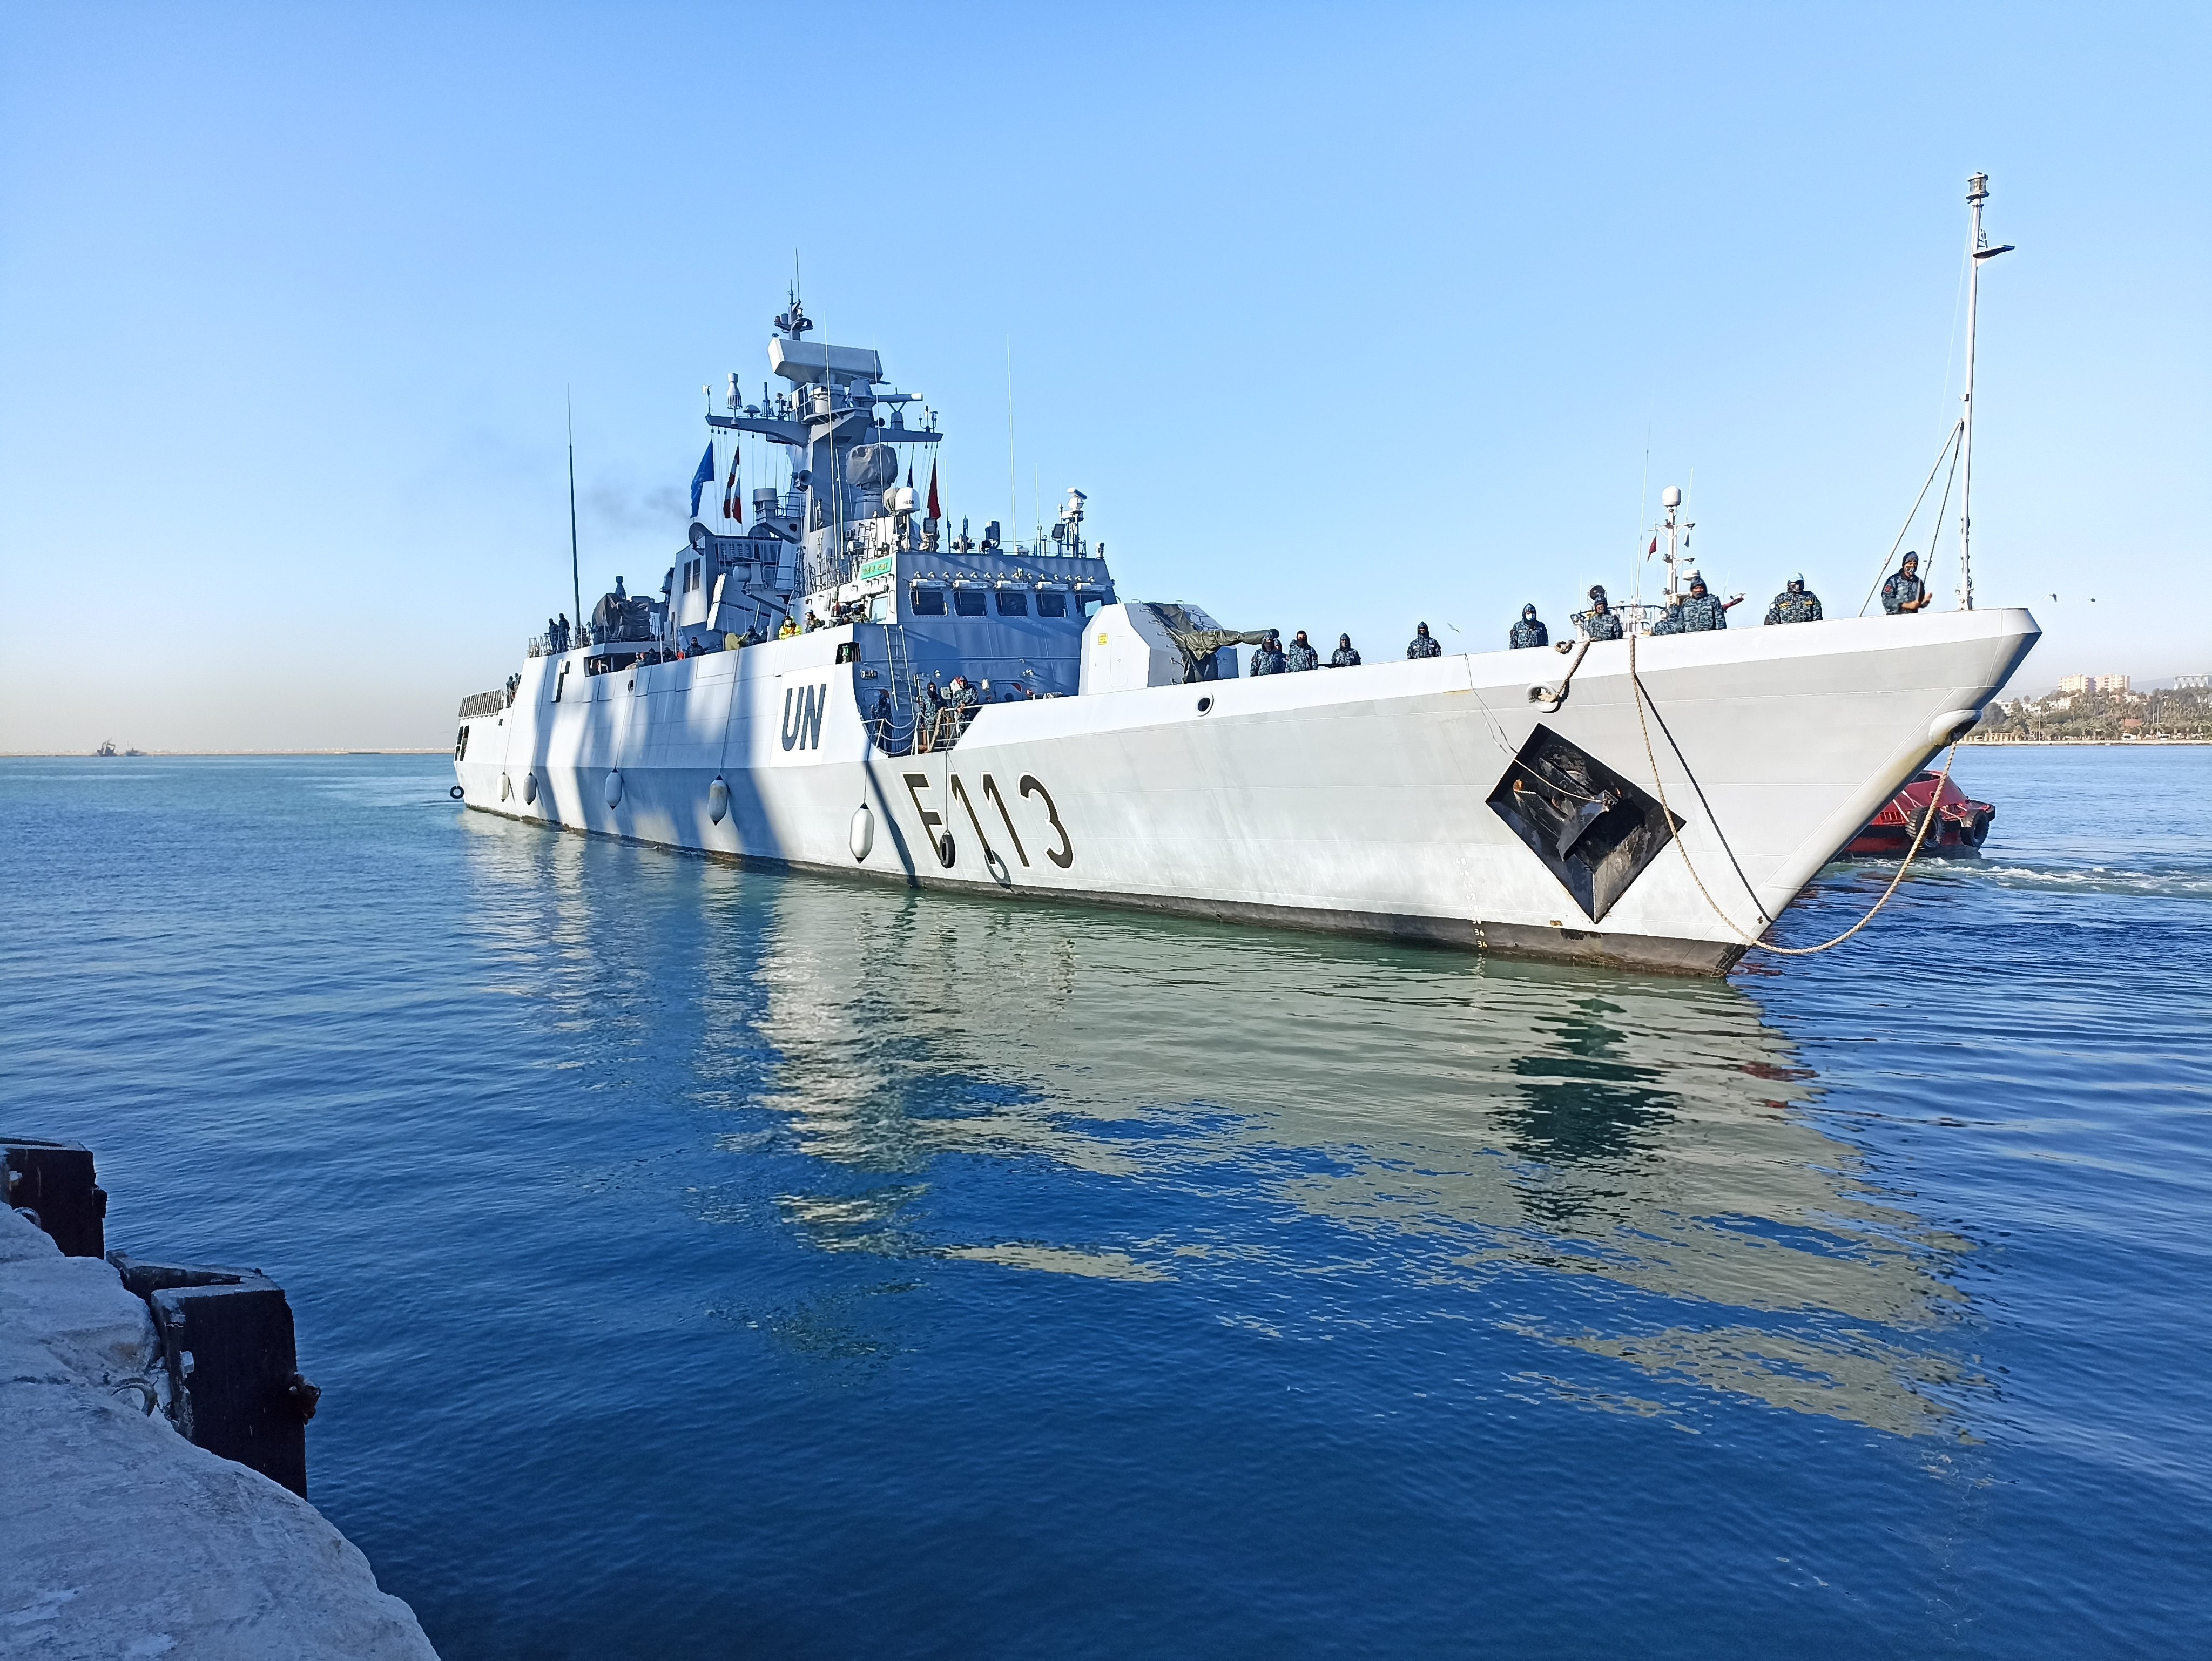 Defense Technology of Bangladesh-DTB on Twitter: "Bangladesh Navy's Type-056 guided missile corvette BNS SANGRAM ship made a port visit to Mersin as part of the mission of the UN Interim Task Force